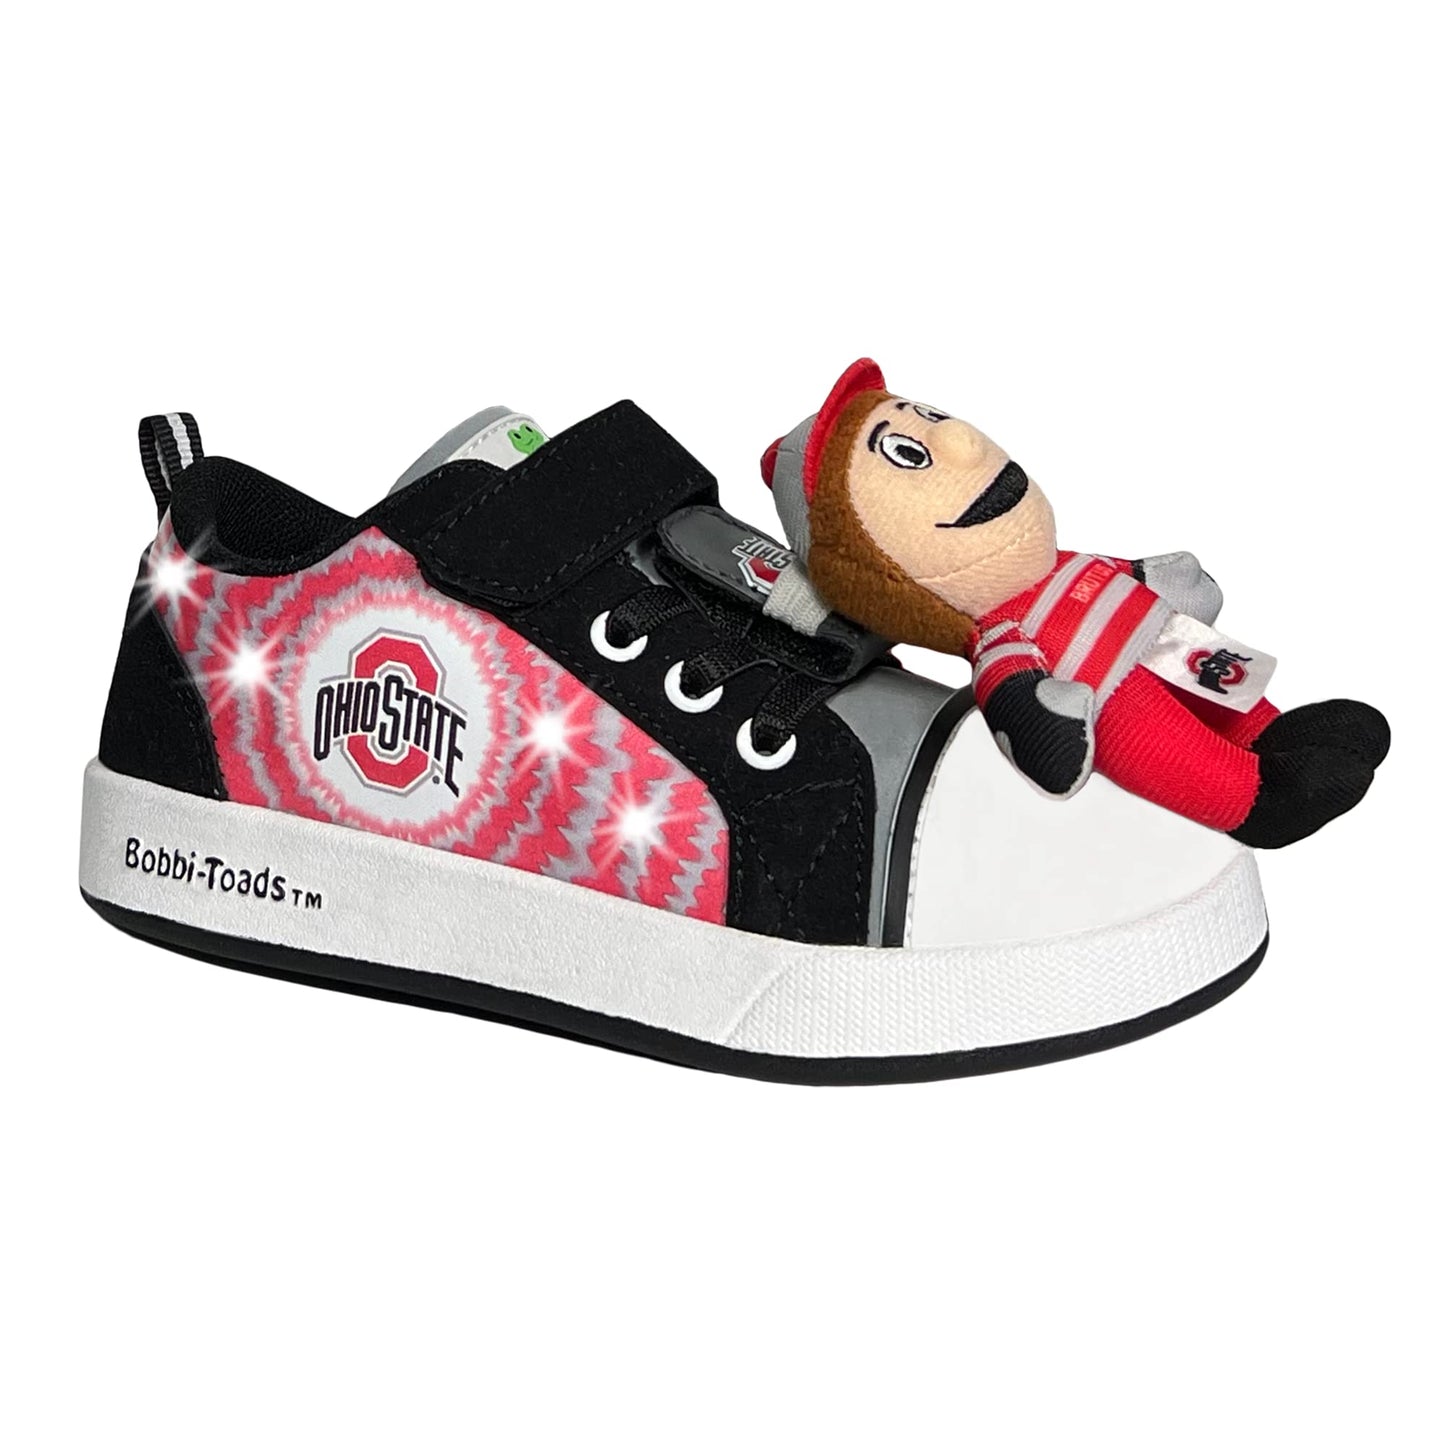 Bobbi-Toads Ohio State University Kids Lighted Sneaker OSU Child Shoes Tennis Shoes Buckeye with Mascot Brutus Plushie